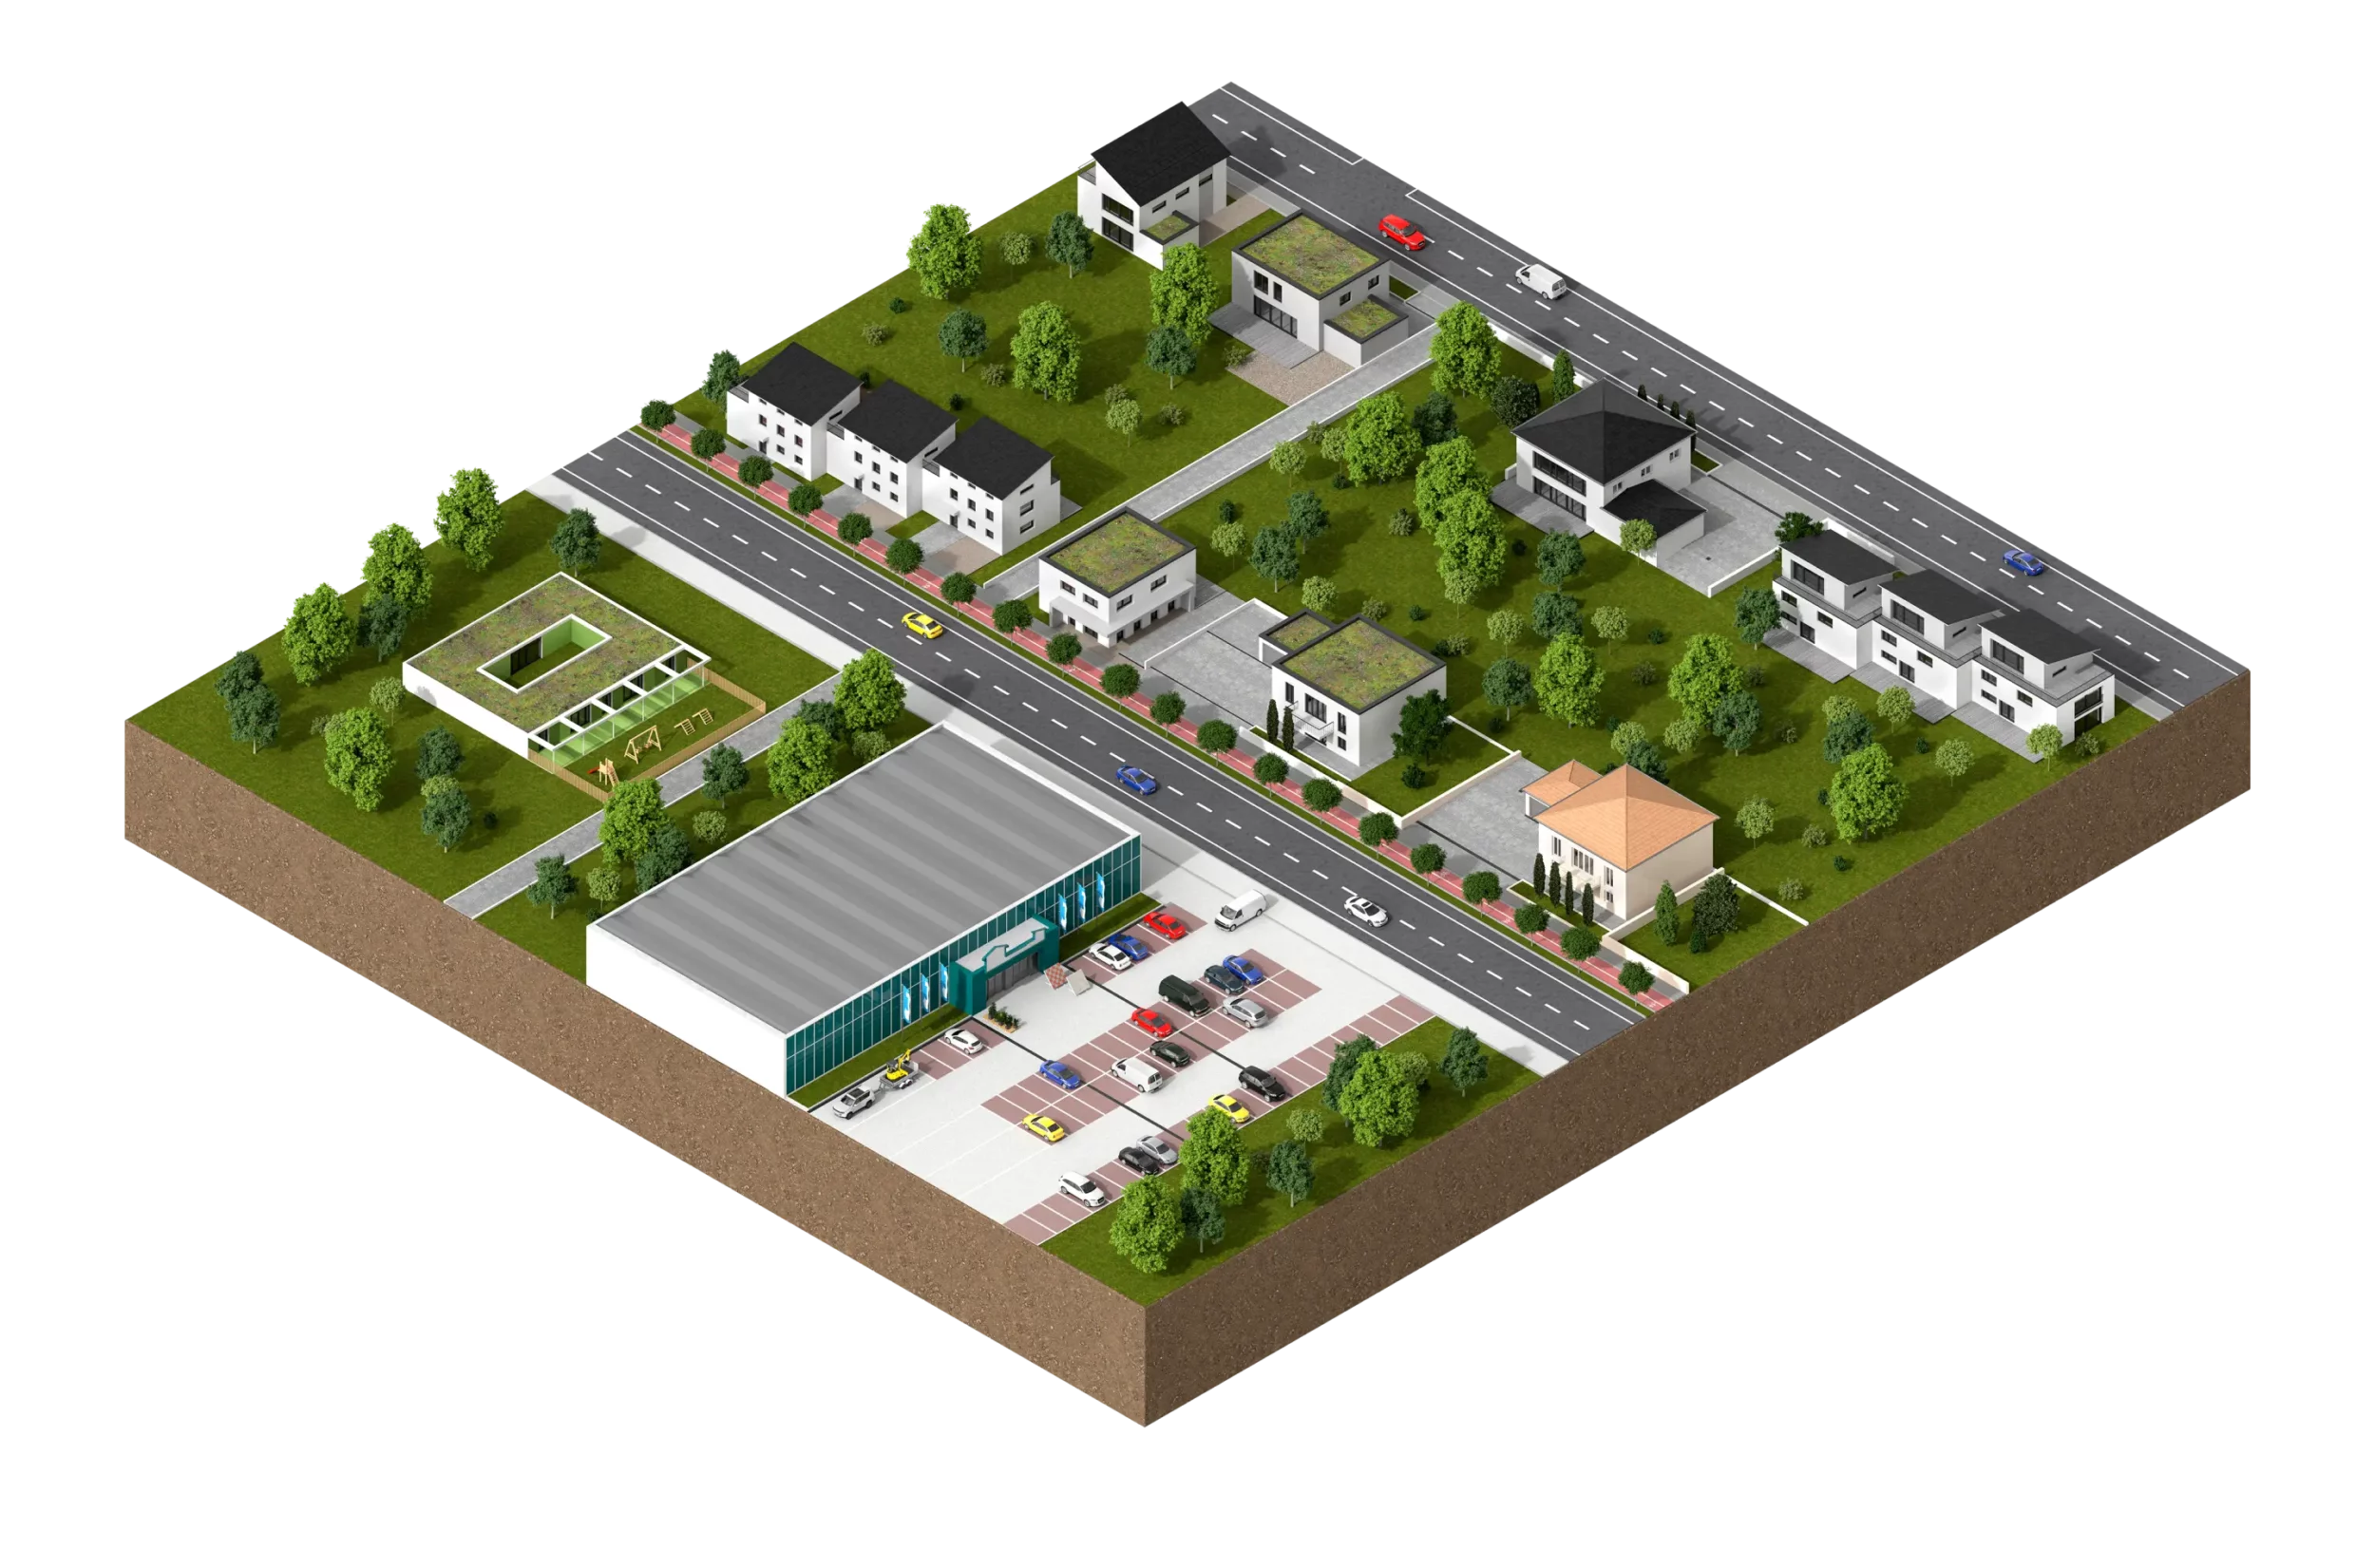 Application visualisation: residential and commercial areas